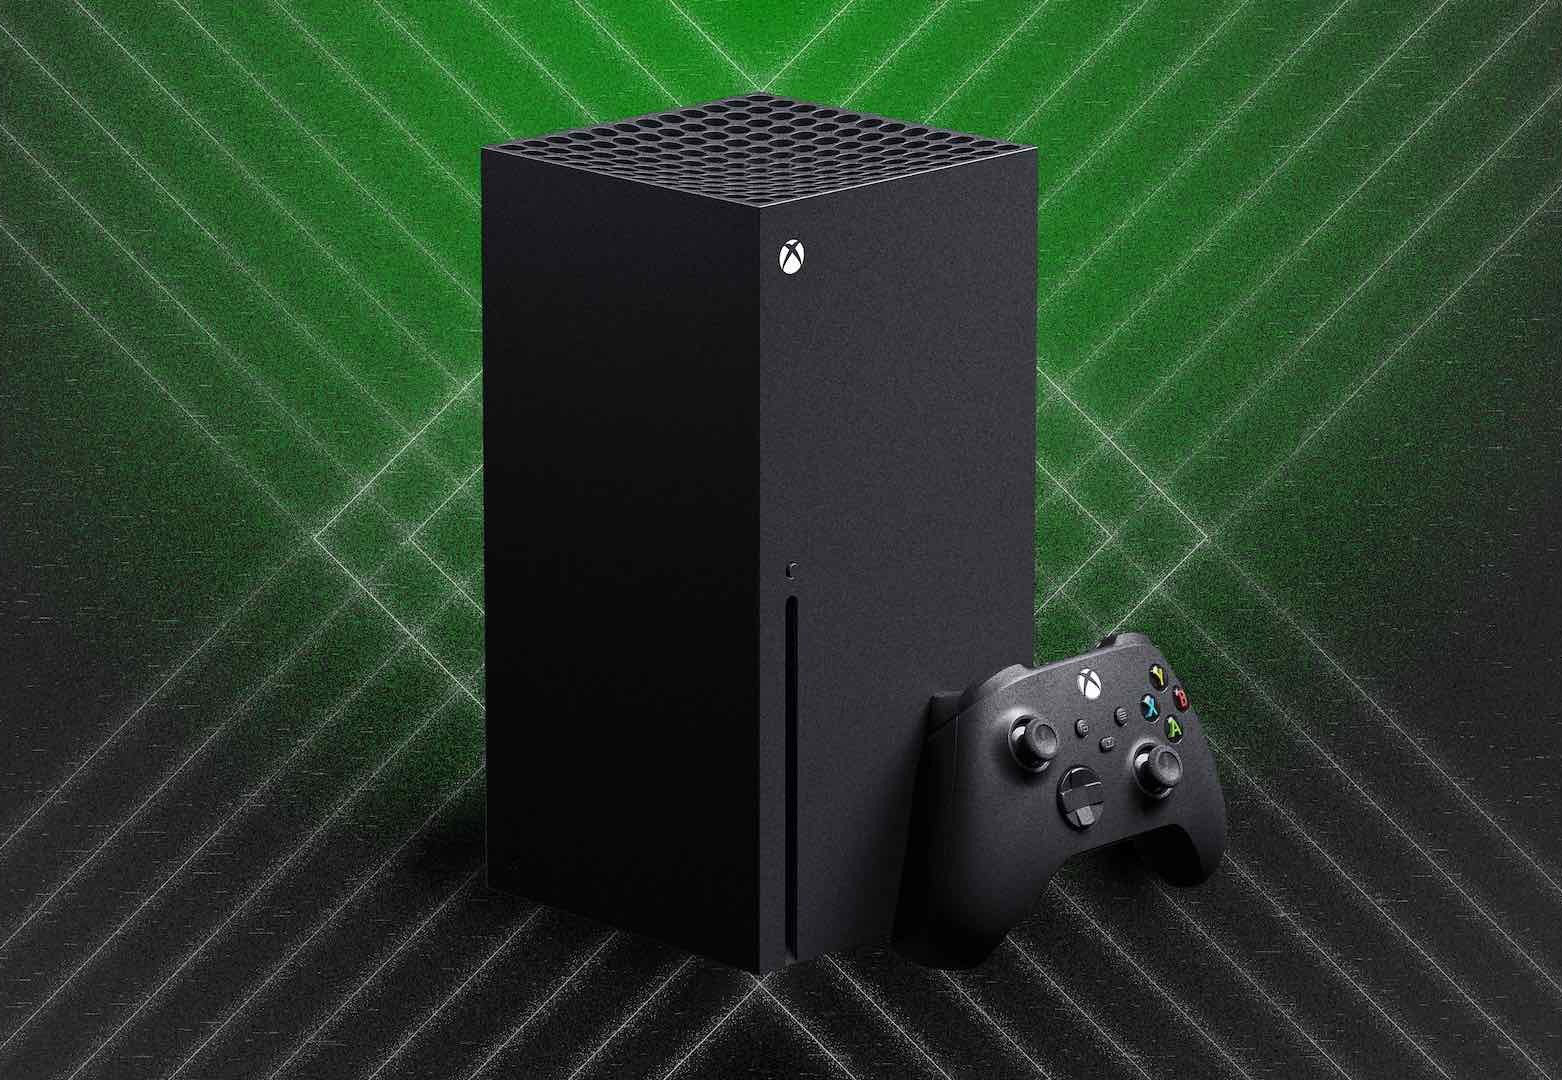 Leaker details upcoming Black Friday deal for Microsoft Xbox